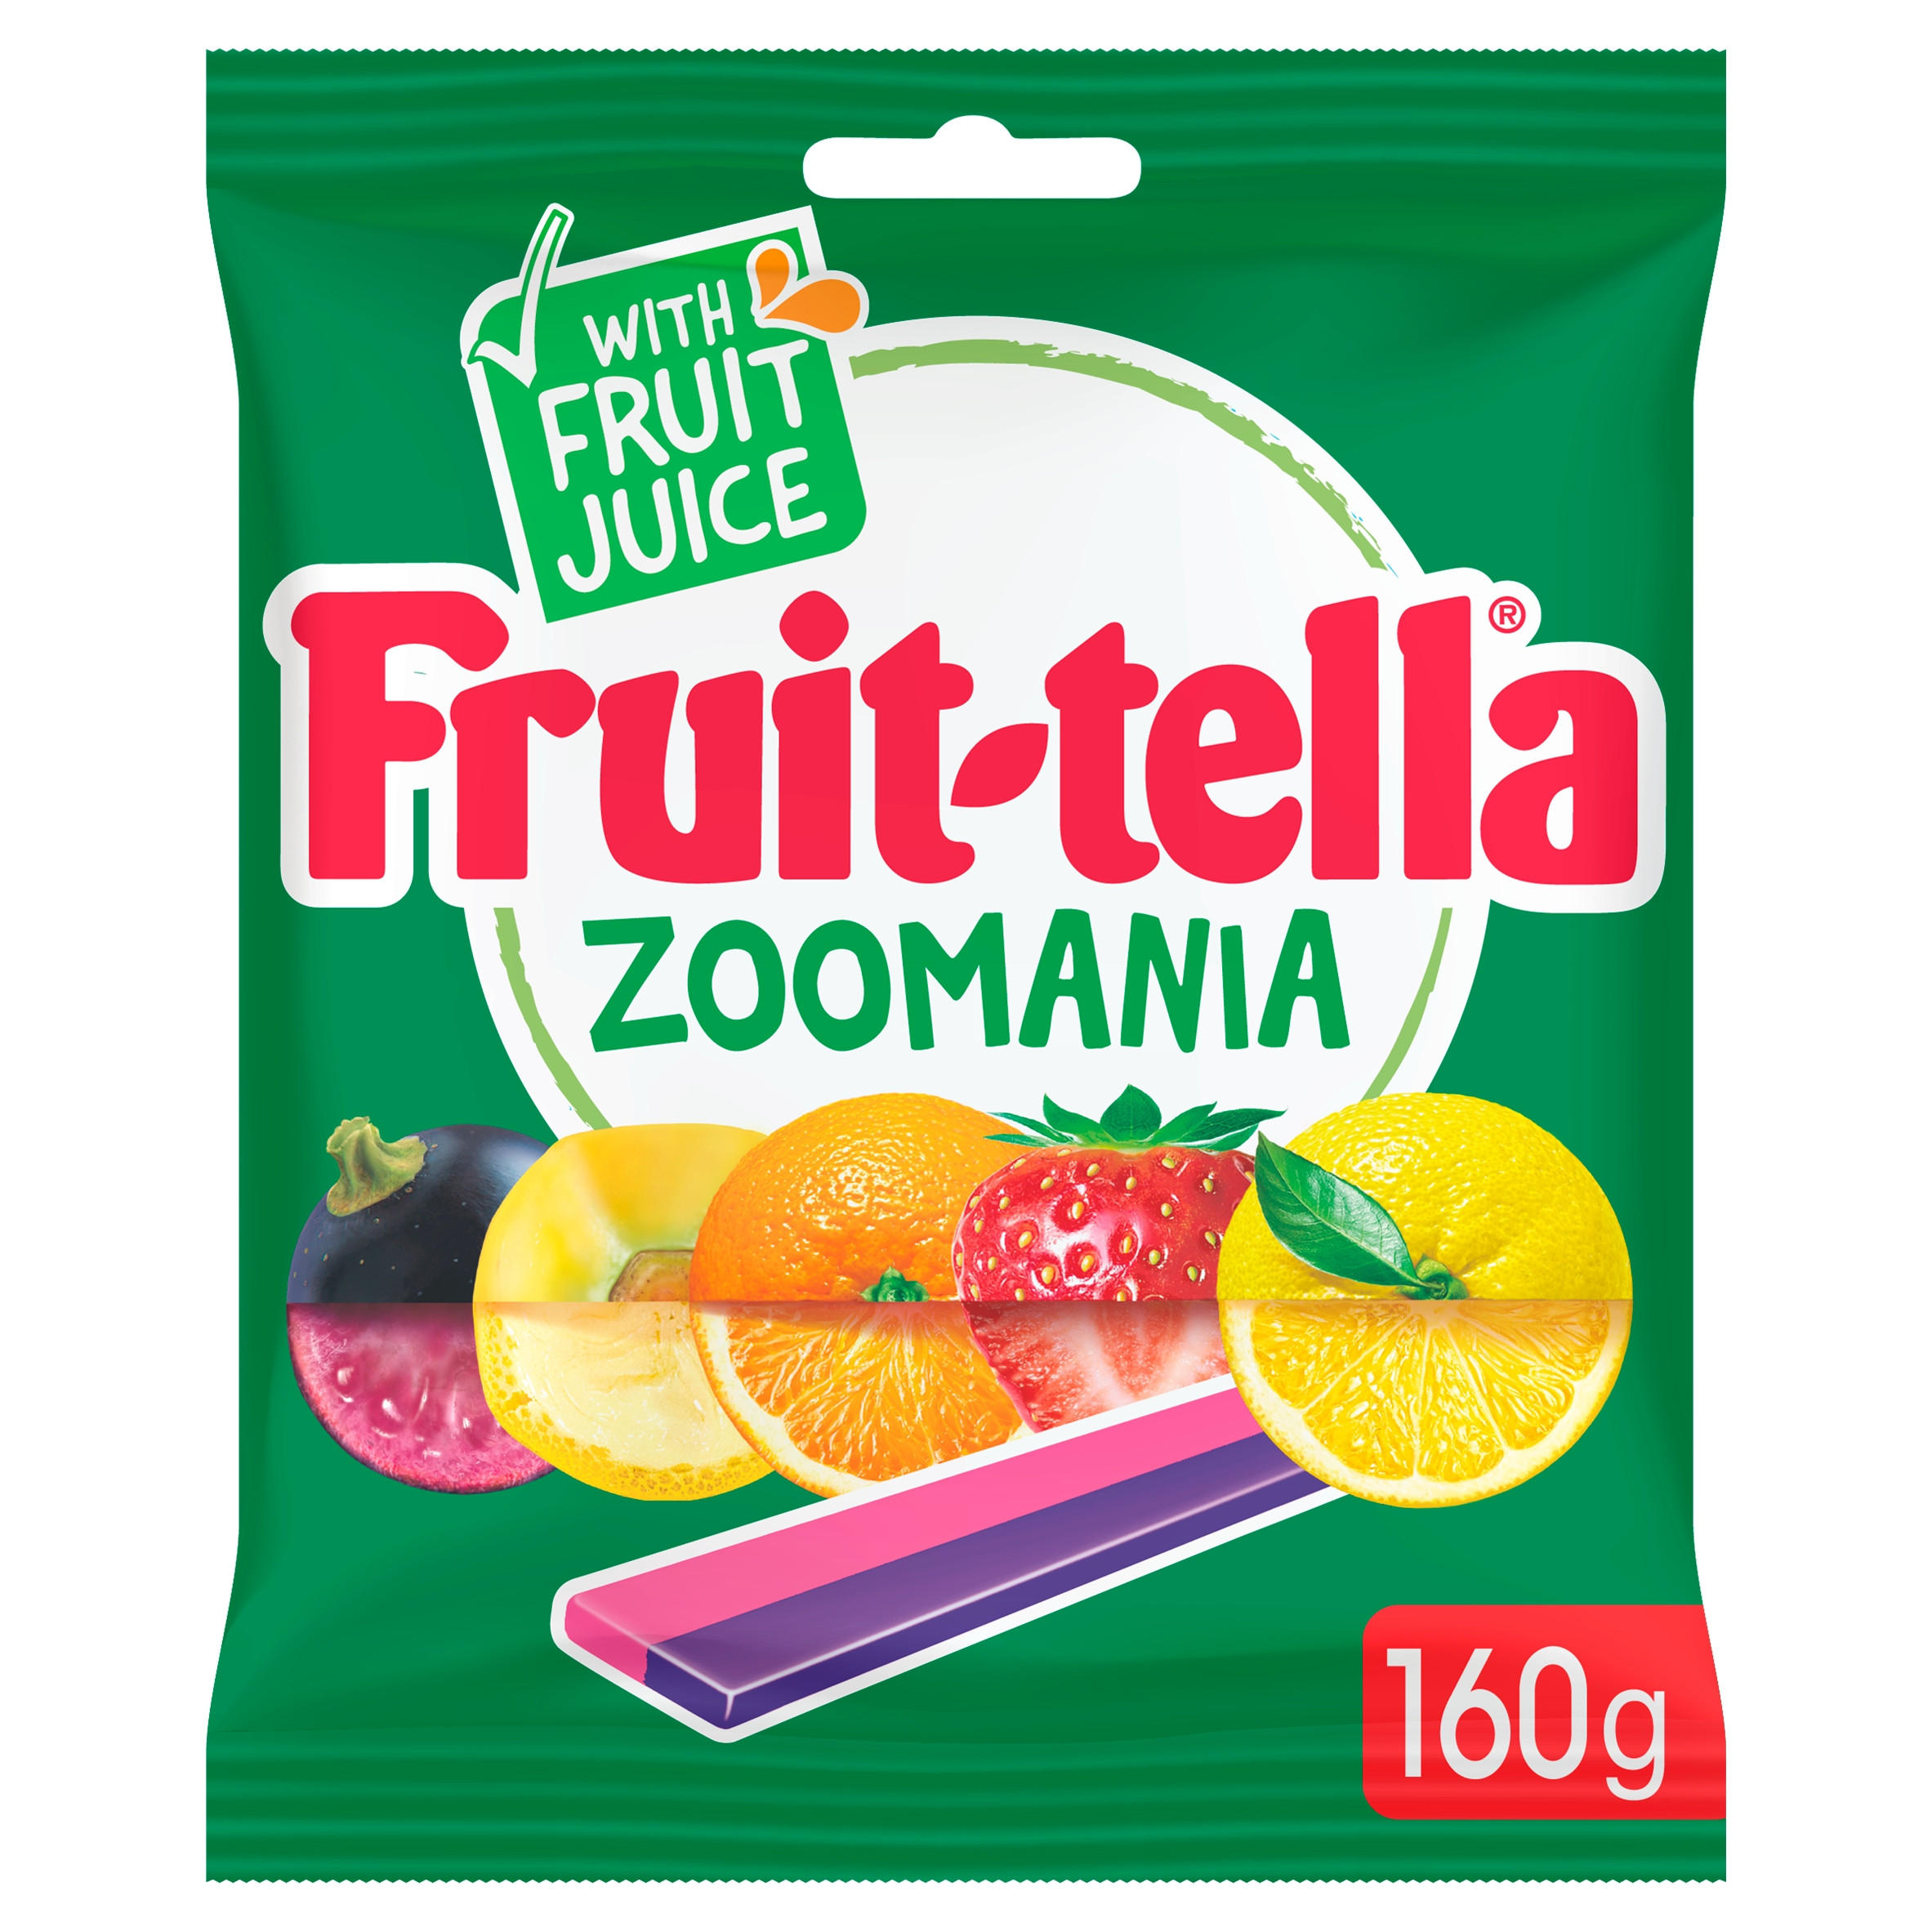 Fruittella Flavours from nature – Made In Eatalia